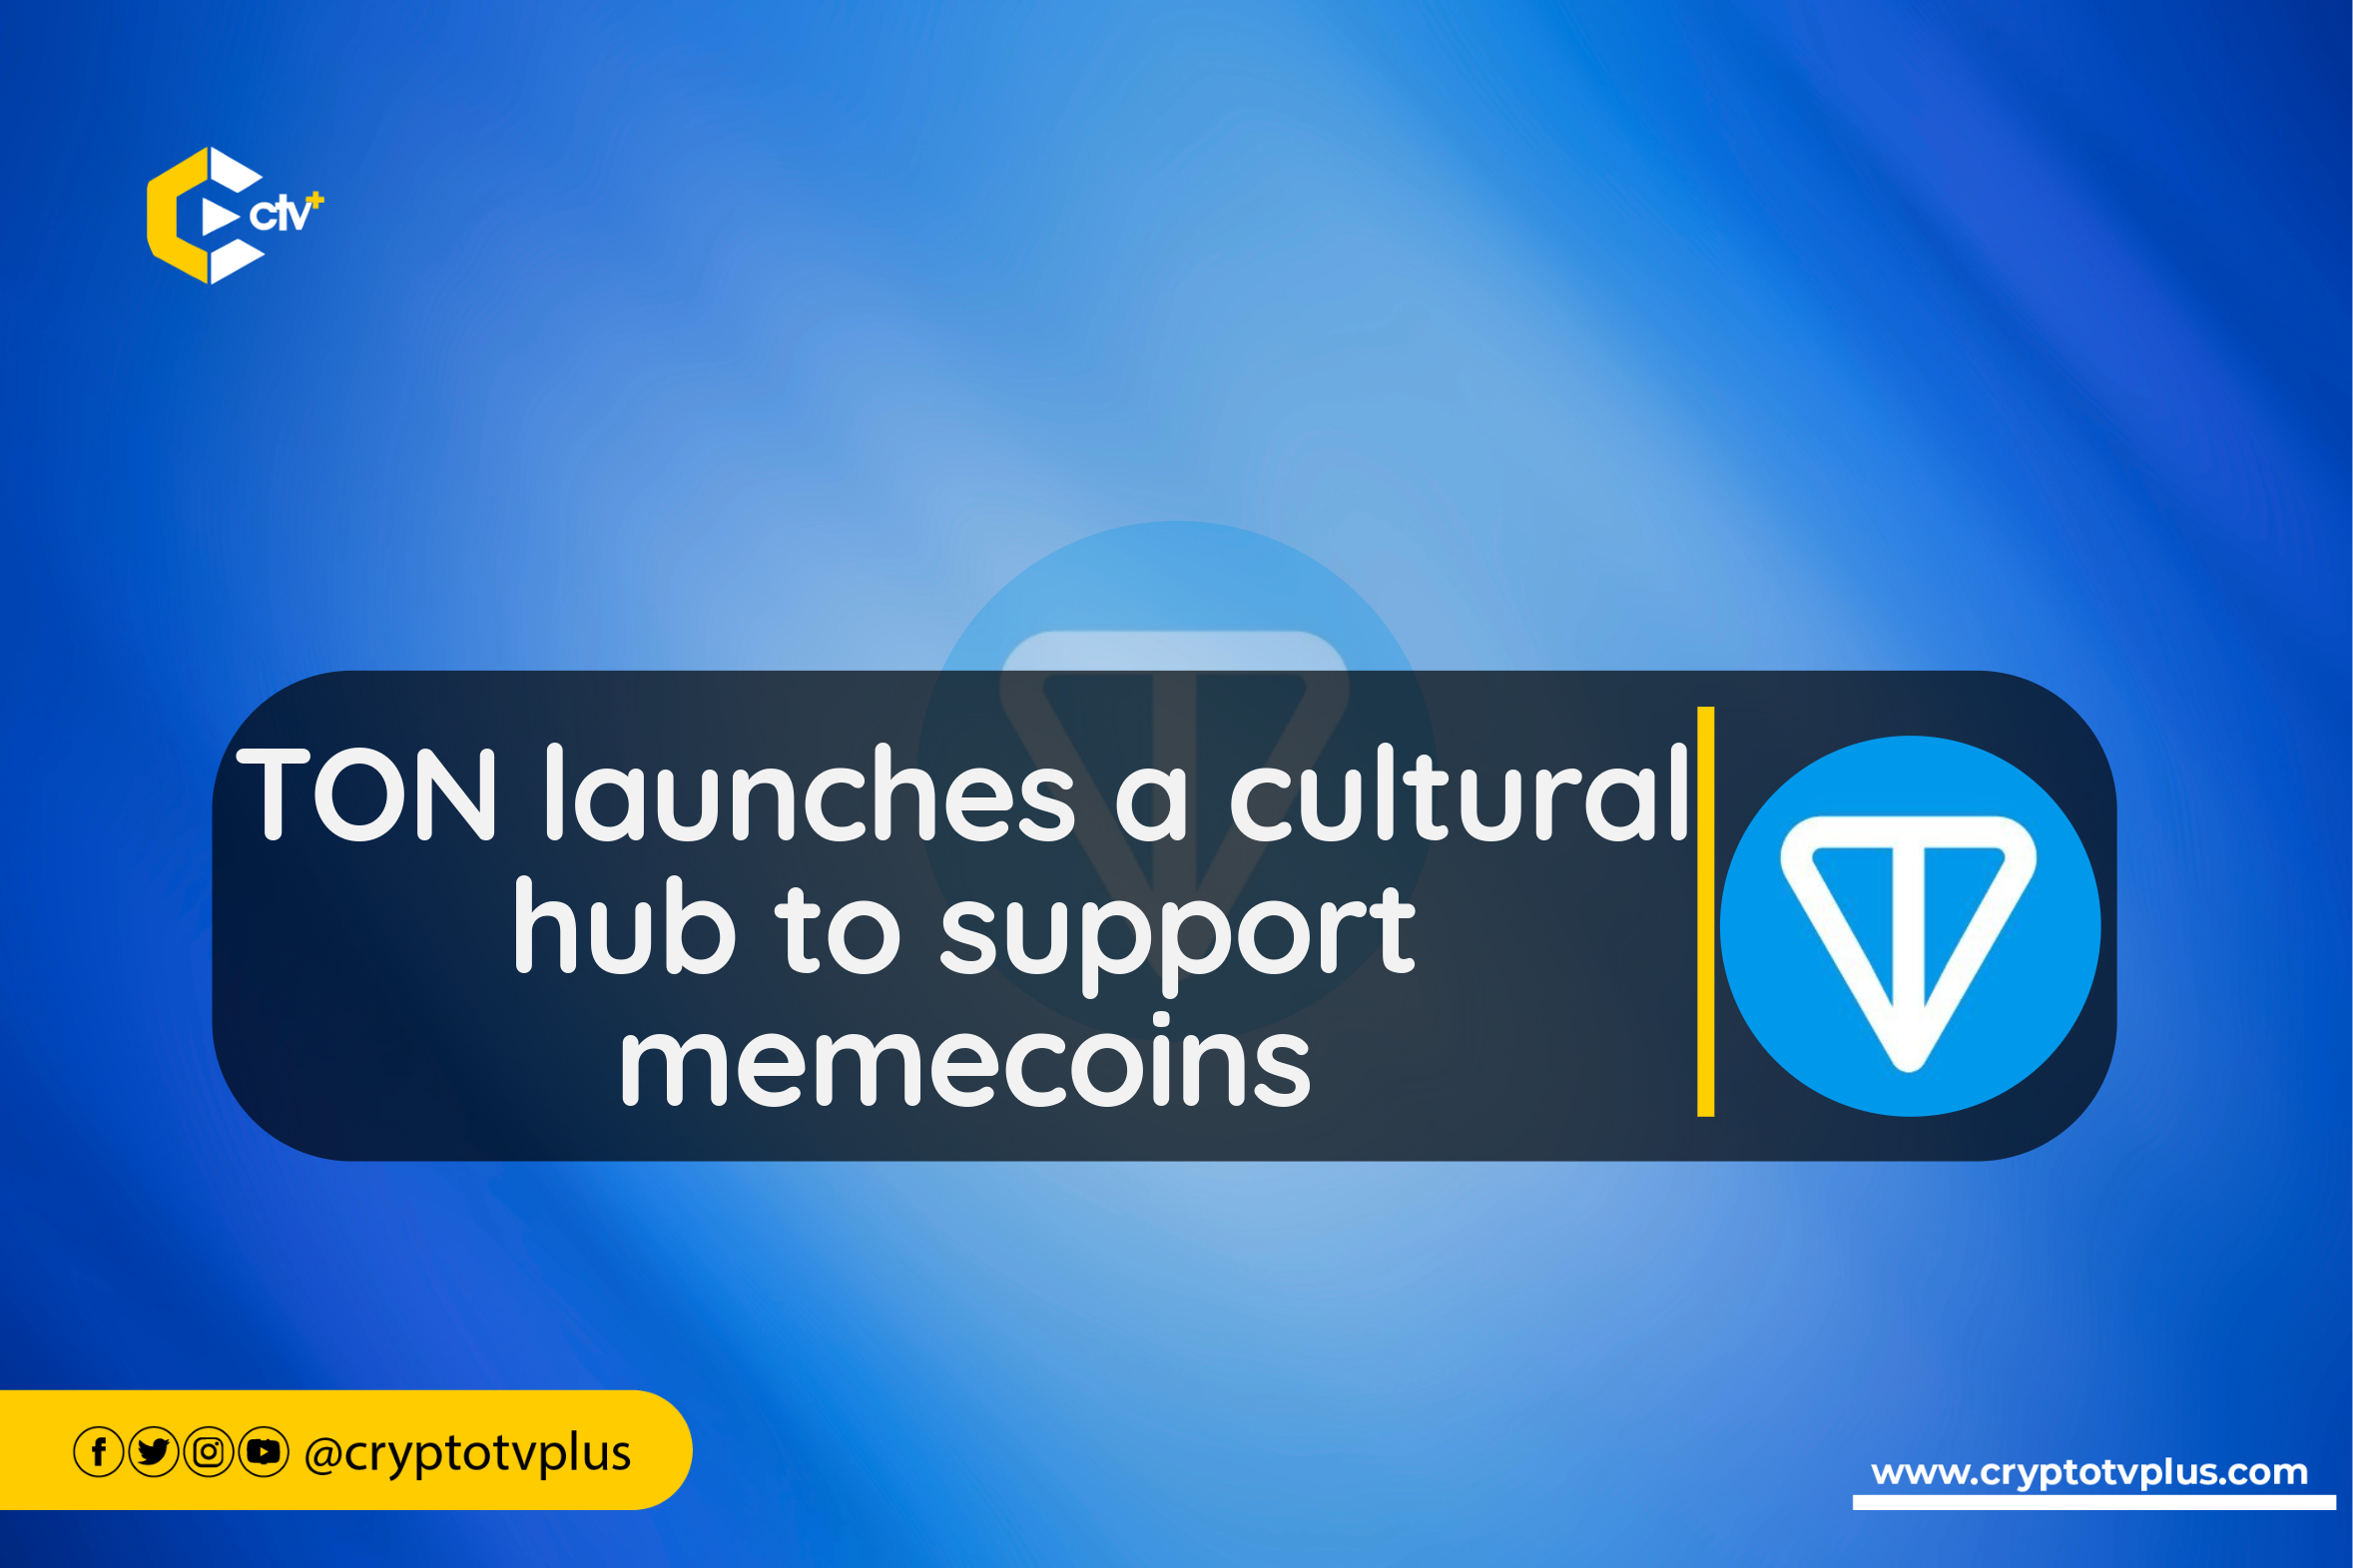 The Telegram Open Network (TON) introduces Memelandia, a new cultural hub aimed at supporting & promoting memecoins, improving their visibility & utility.